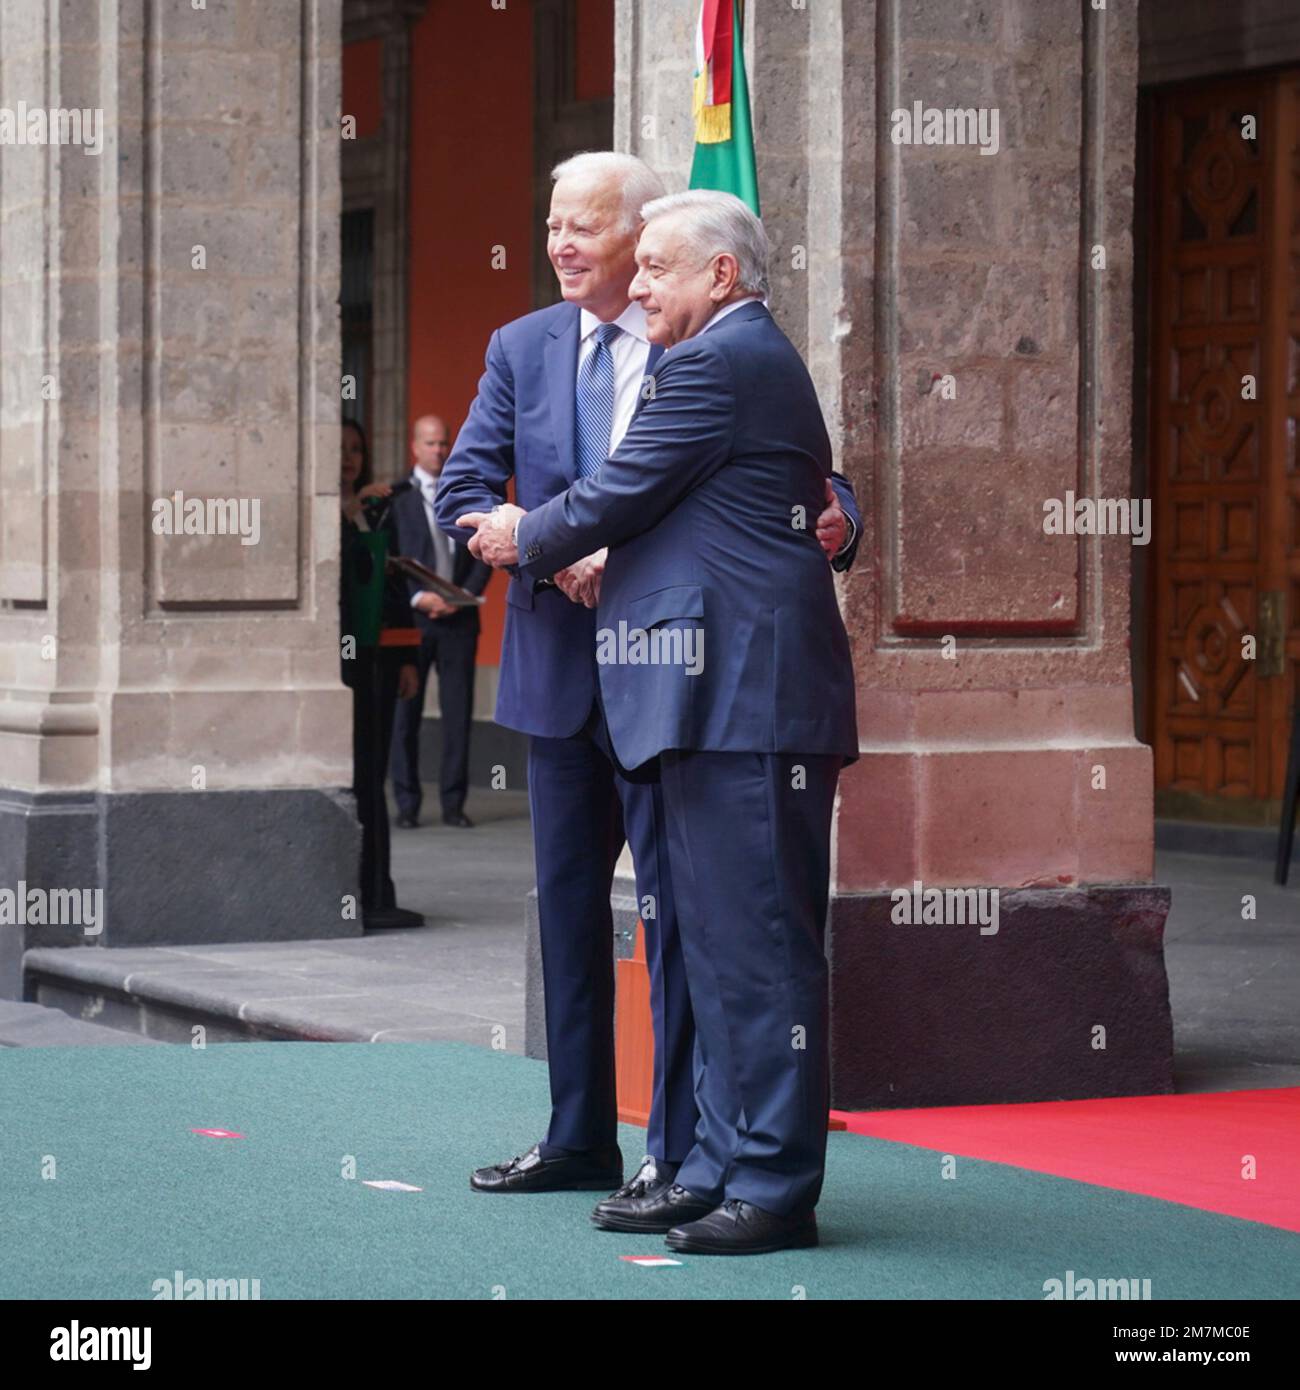 Mexico City, Mexico. 09th Jan, 2023. U.S President Joe Biden, left, and Mexican President Andres Manuel Lopez Obrador embrace during the arrival ceremony before the North American Leaders Summit at the Palacio Nacional, January 9, 2023 in Mexico City, Mexico. Credit: Presidencia de la Republica Mexicana/Mexican Presidents Office/Alamy Live News Stock Photo